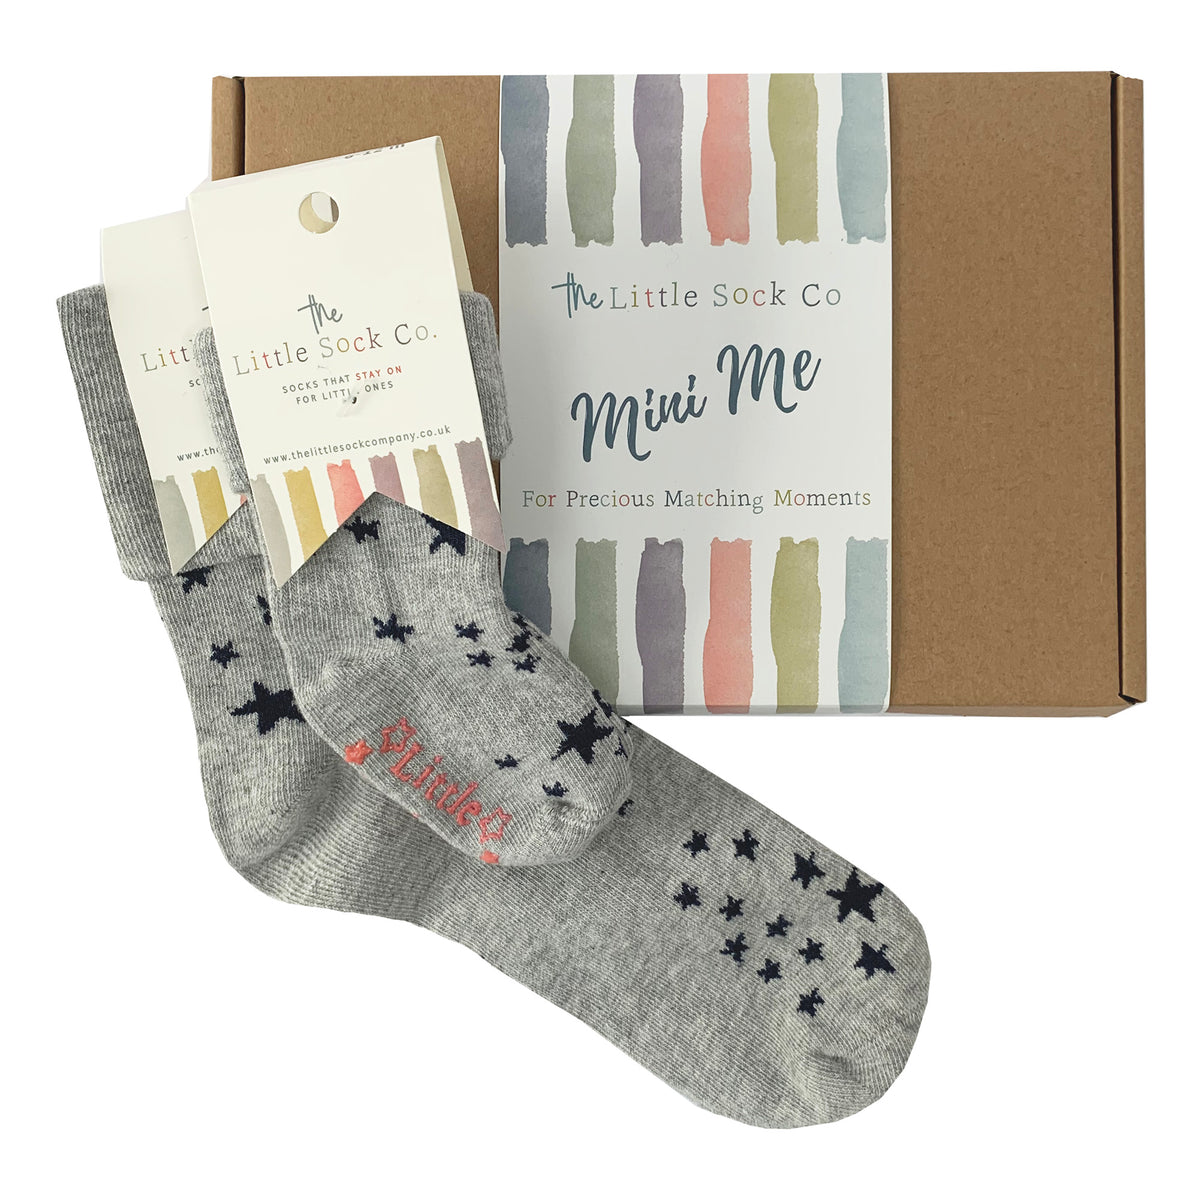 Mini Me Matching Adult and Child Family Socks Gift Set in Stars ⭐️ - The Perfect Gift for Birthdays or Christmas